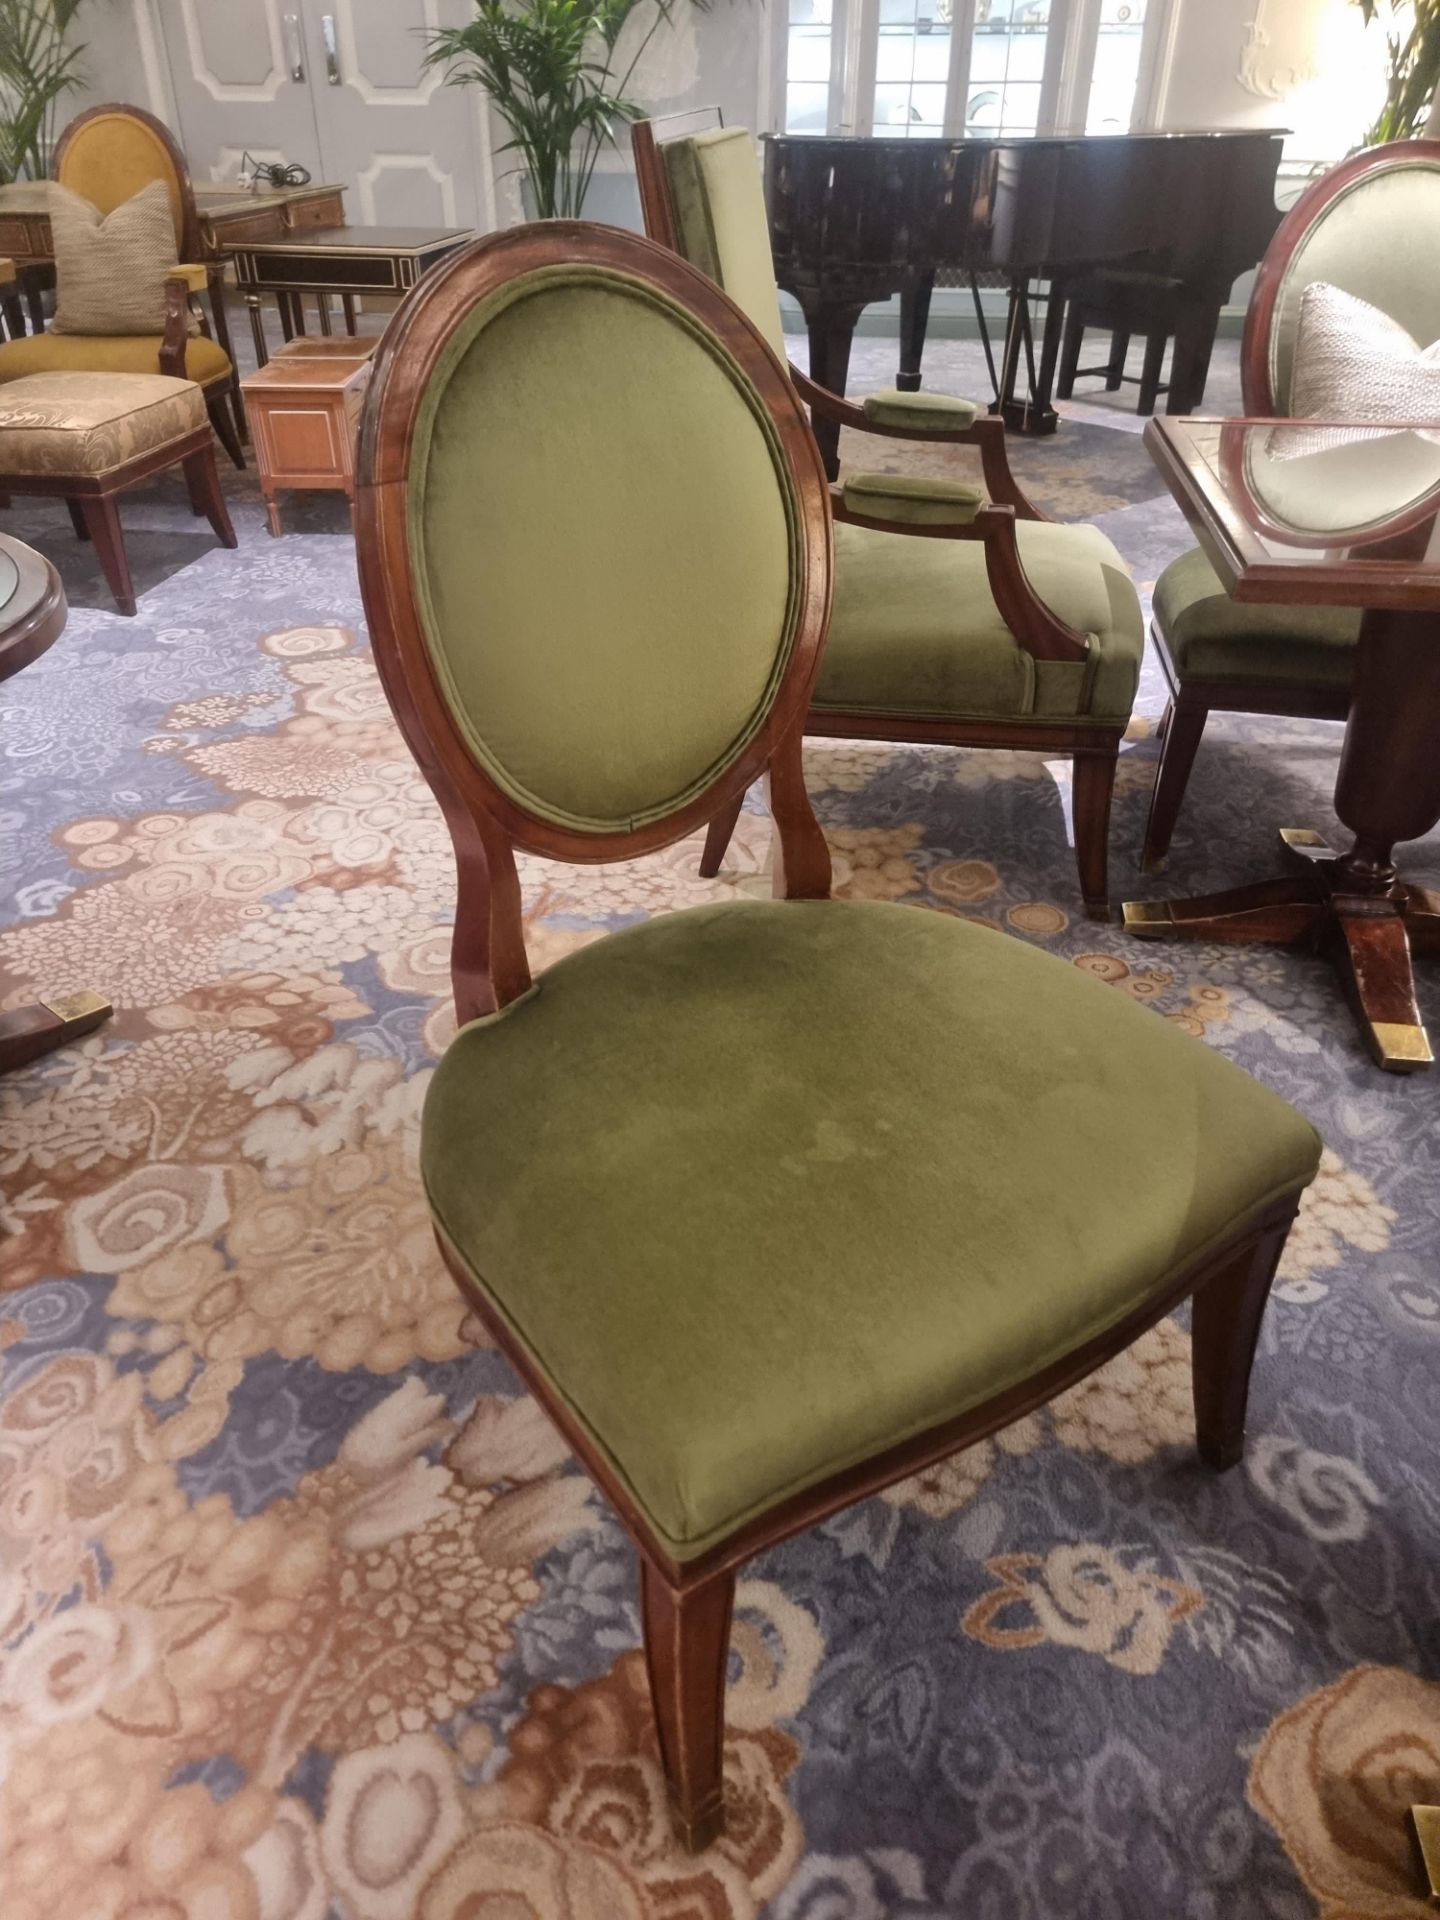 Louis XVI Style Framed And Upholstered Chair In Lelievre Paris Olive Green Salon Chair 68 x 68 x - Bild 3 aus 3